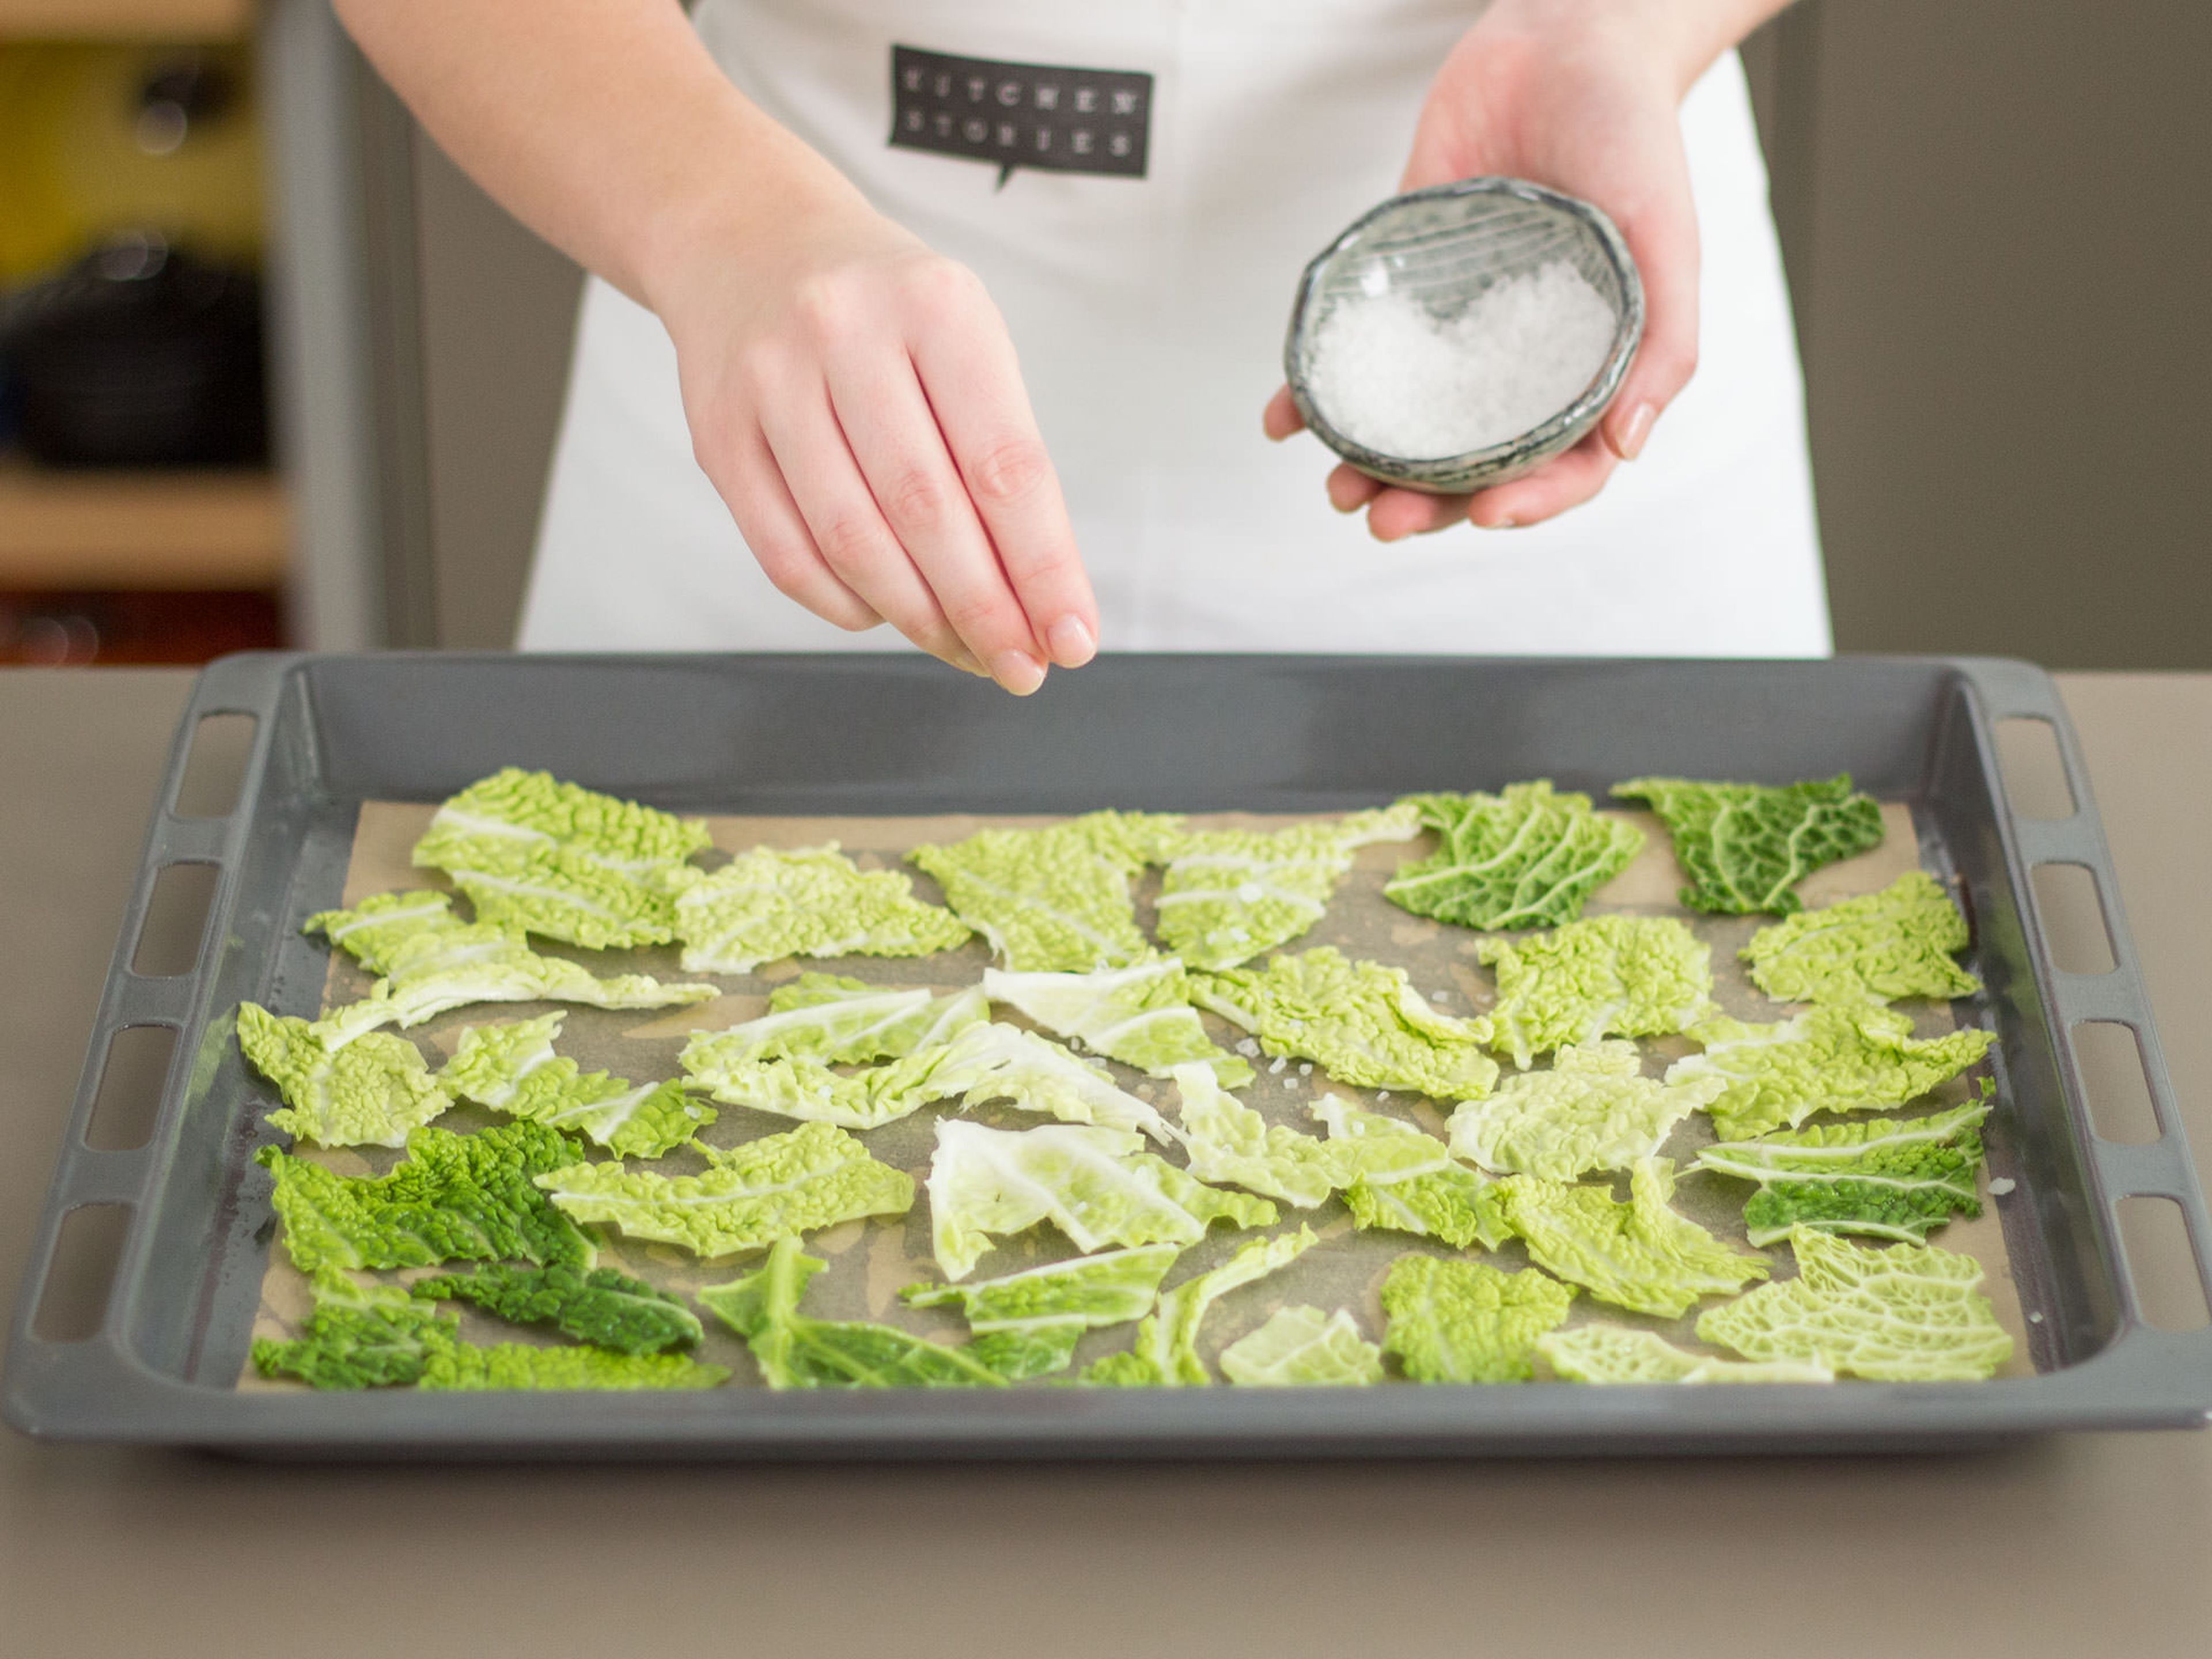 Arrange cabbage on a parchment paper-lined baking sheet. Drizzle with vegetable oil. Sprinkle sea salt on top. Bake in preheated oven at 180°C/355°F for approx. 10 – 15 min. until crispy.